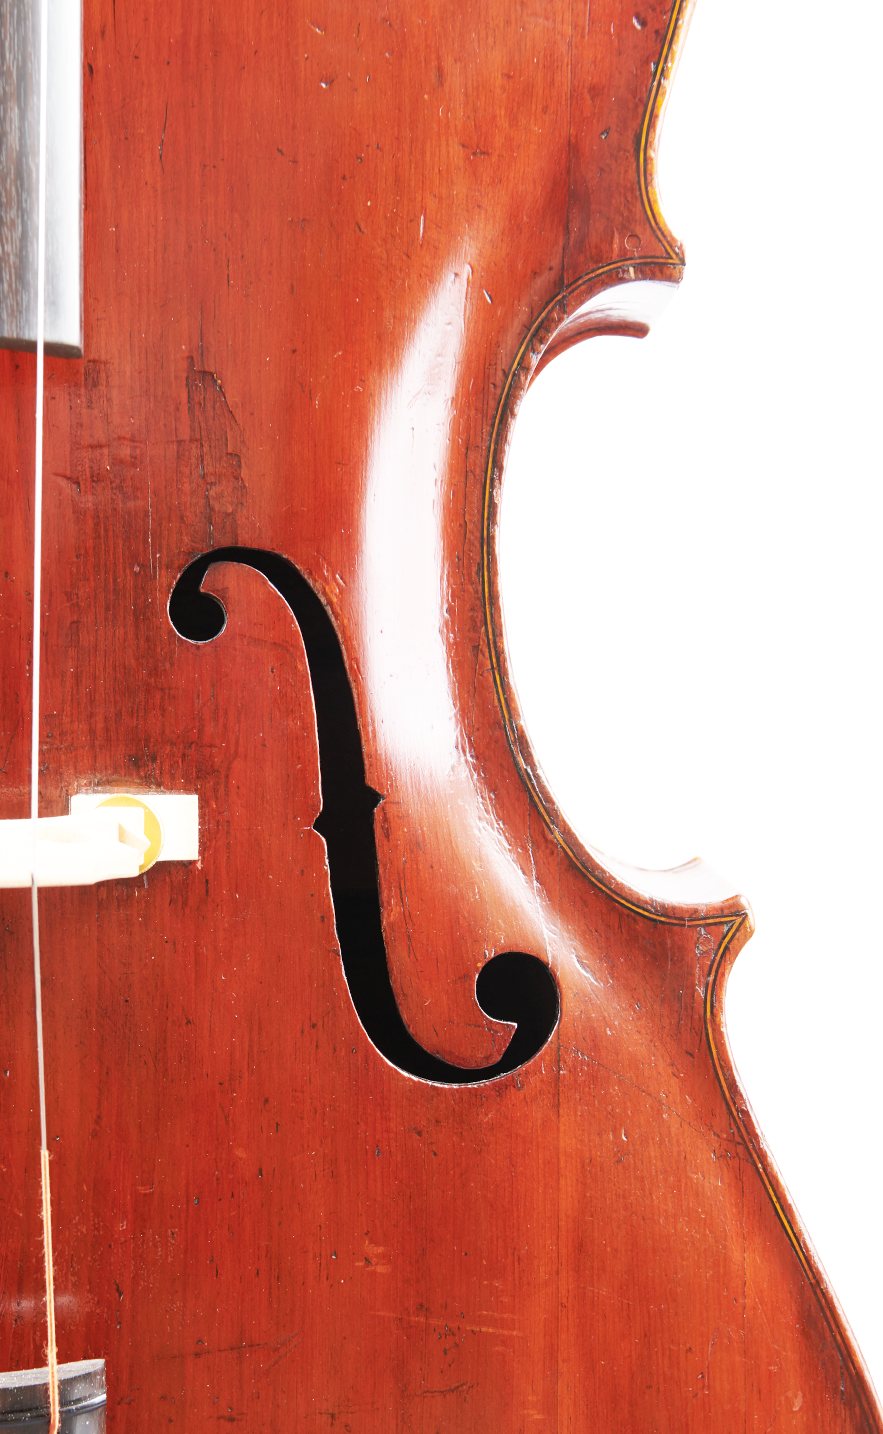 Northern English Double Bass f-hole right